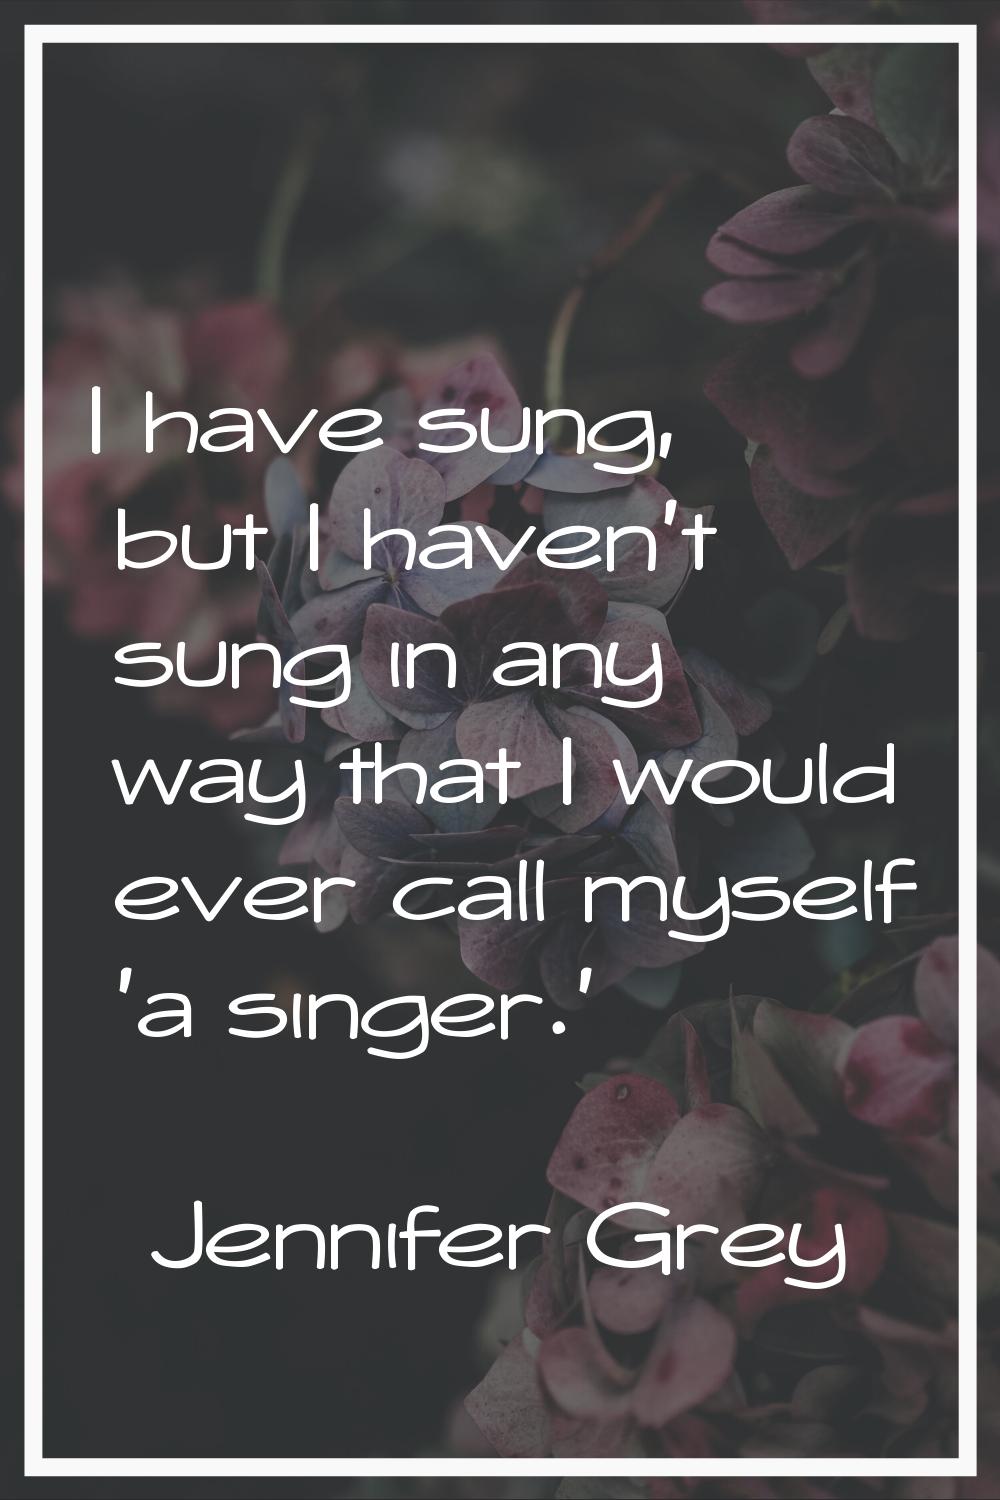 I have sung, but I haven't sung in any way that I would ever call myself 'a singer.'